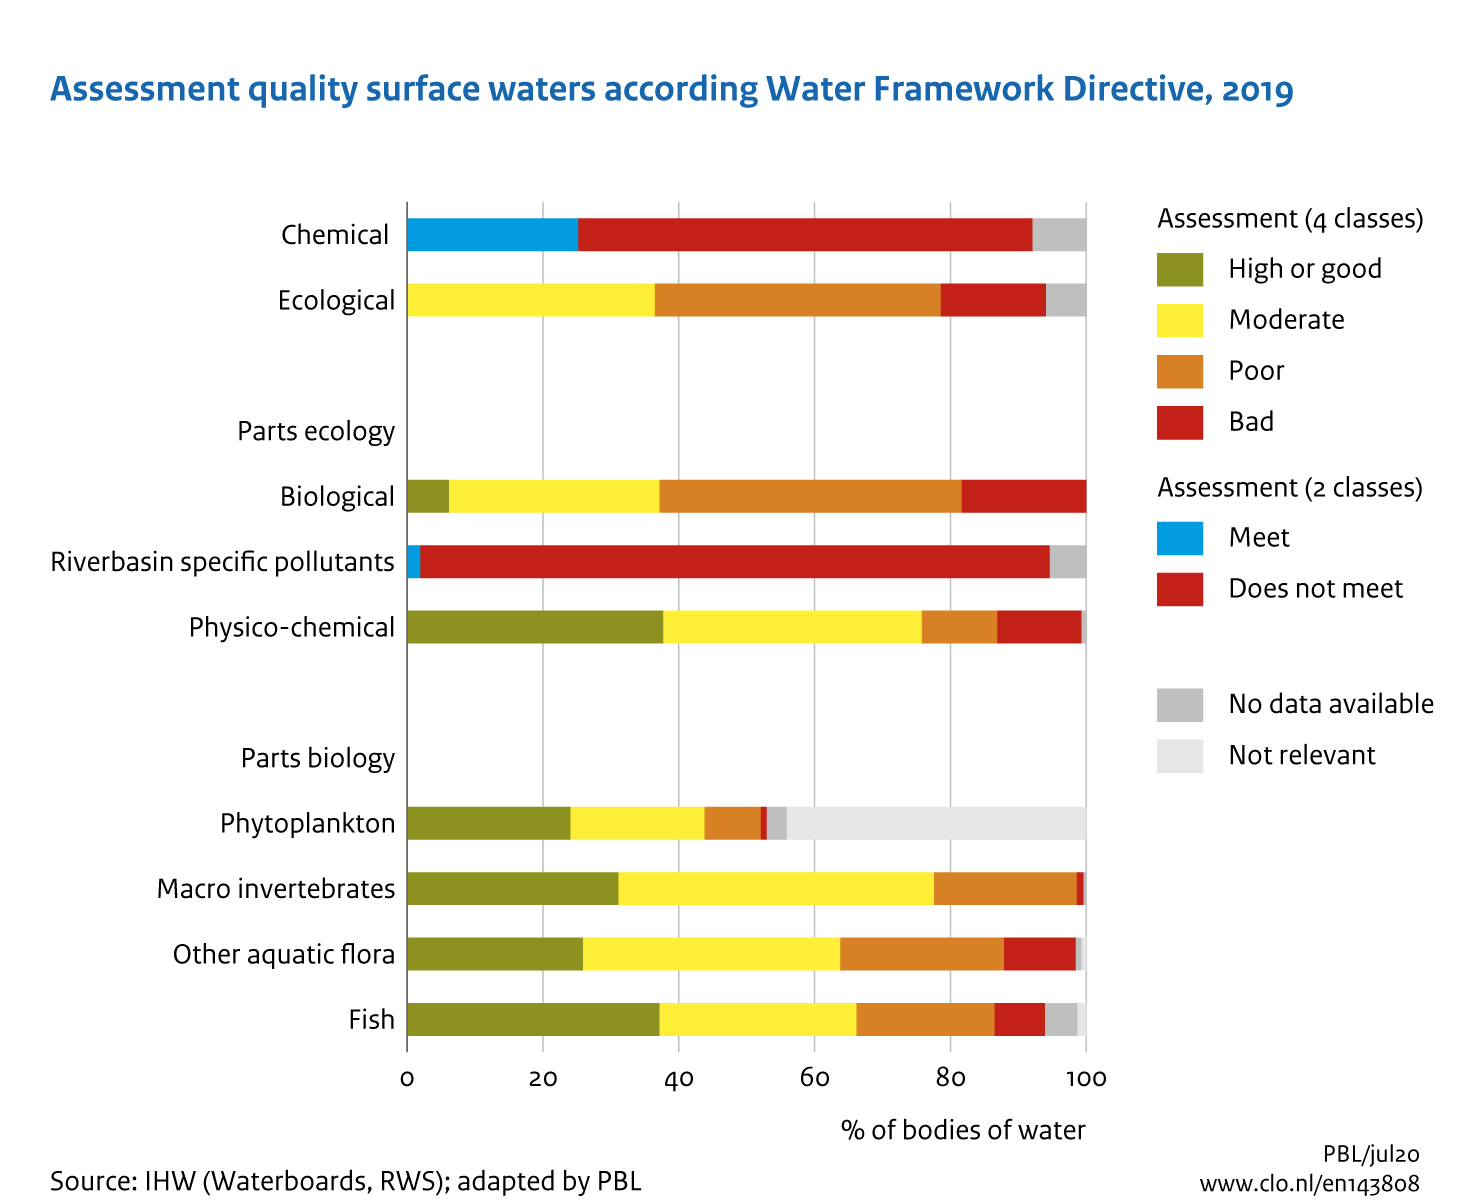 Image Assessment Water Framework Directive . The image is further explained in the text.